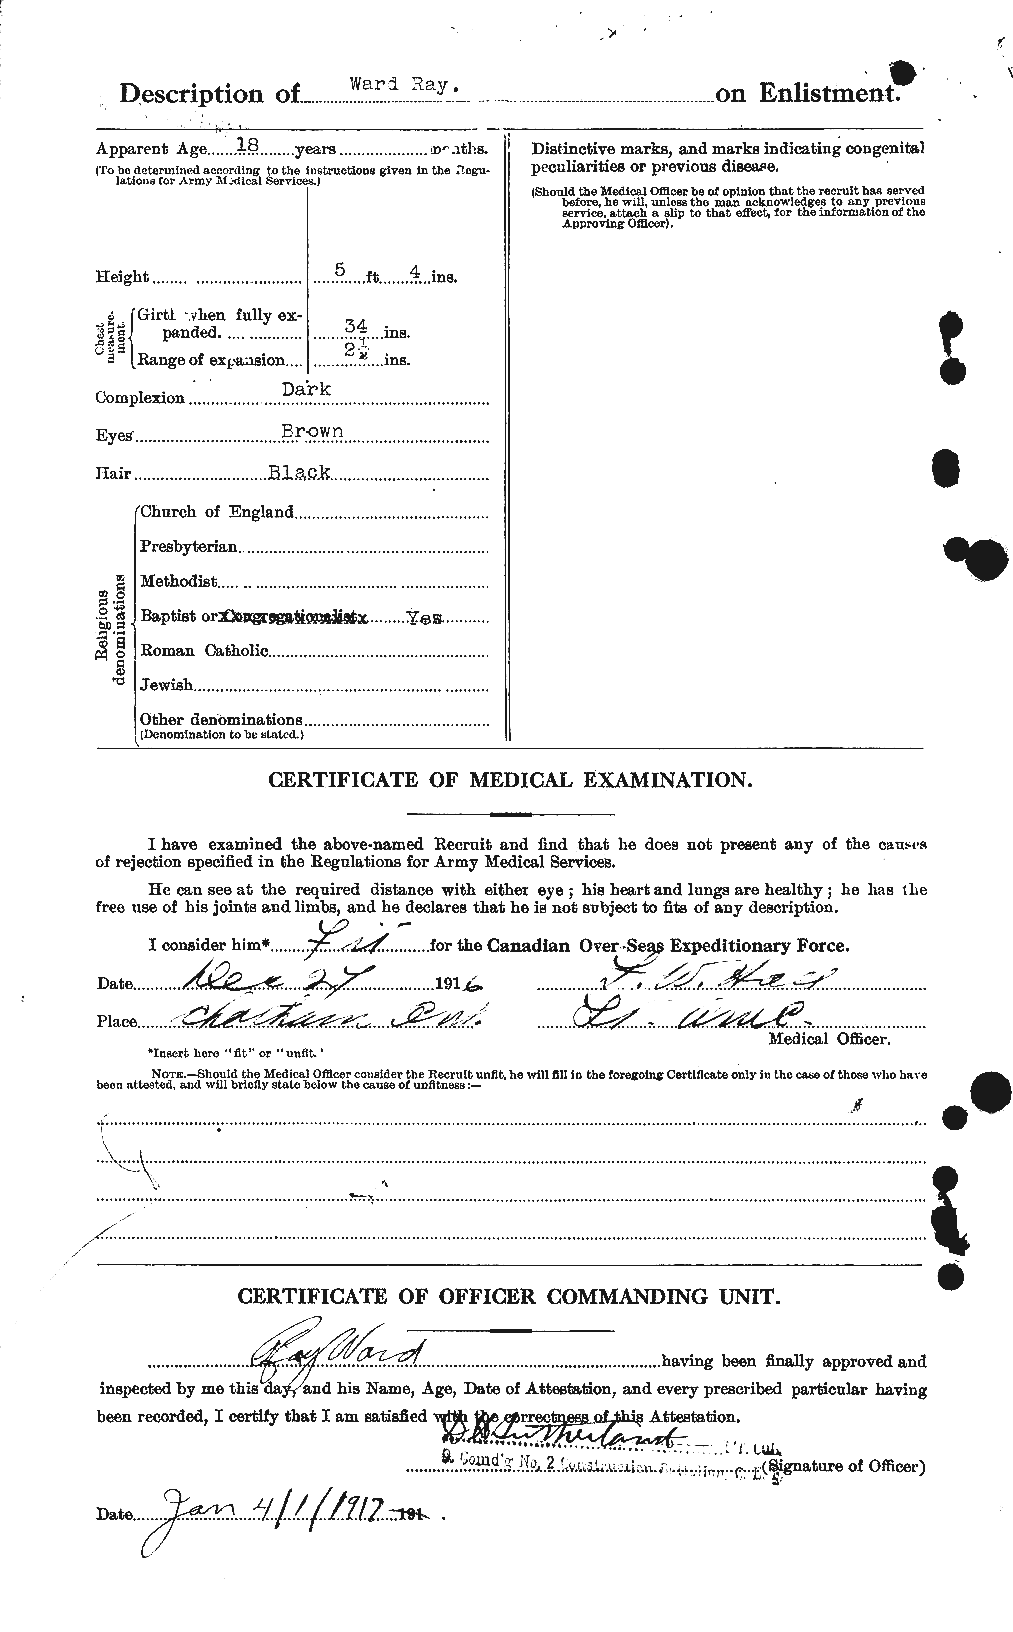 Personnel Records of the First World War - CEF 659637b